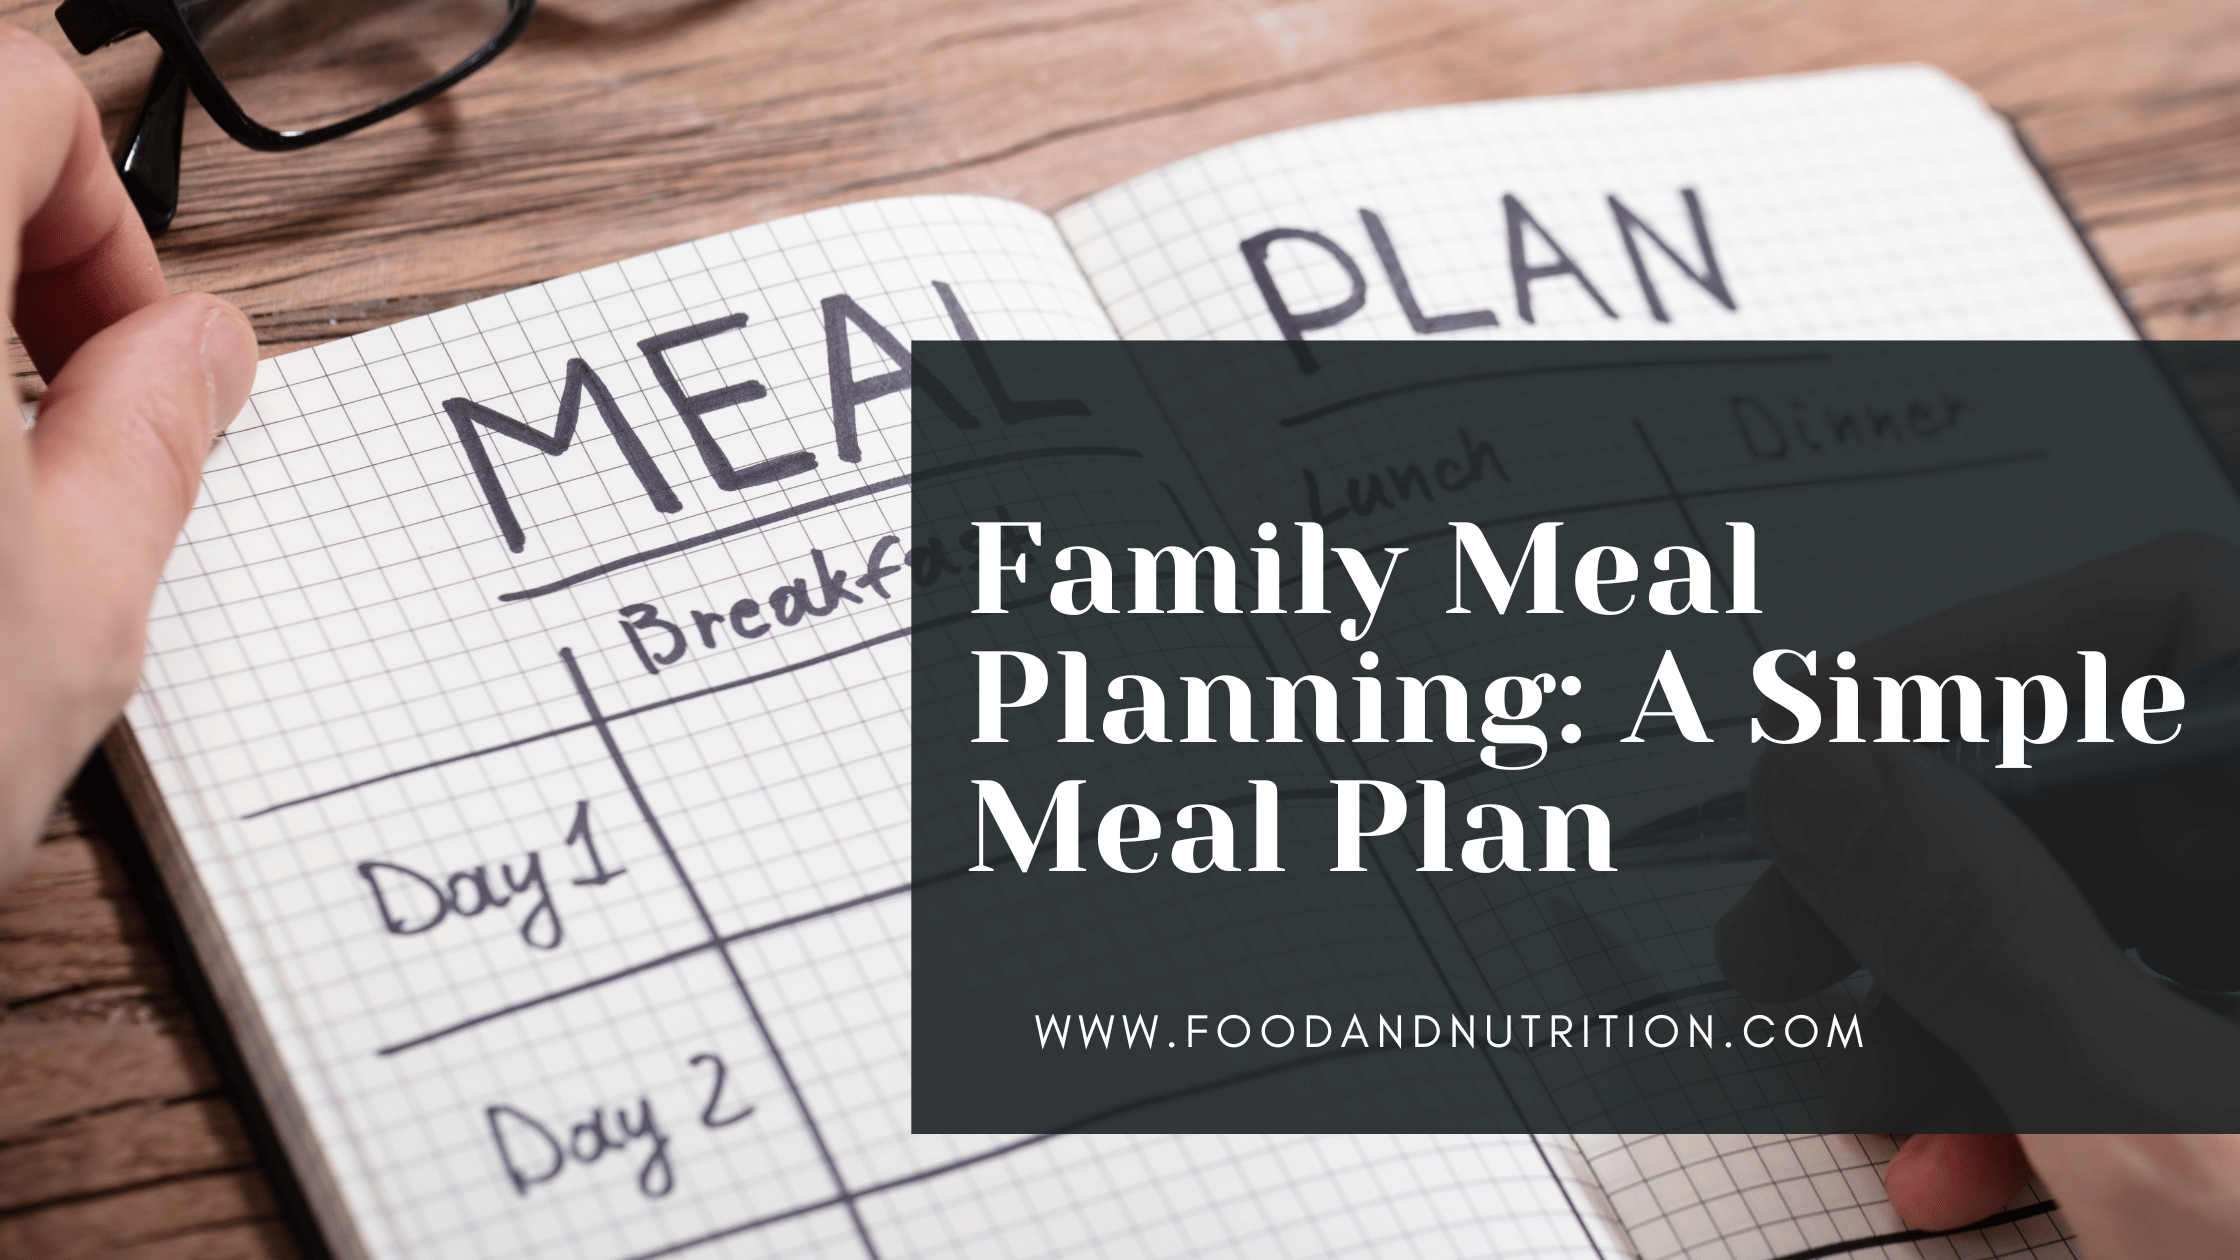 Effortless Weekly Family Meal Planning: Healthy, Diverse, and Delicious